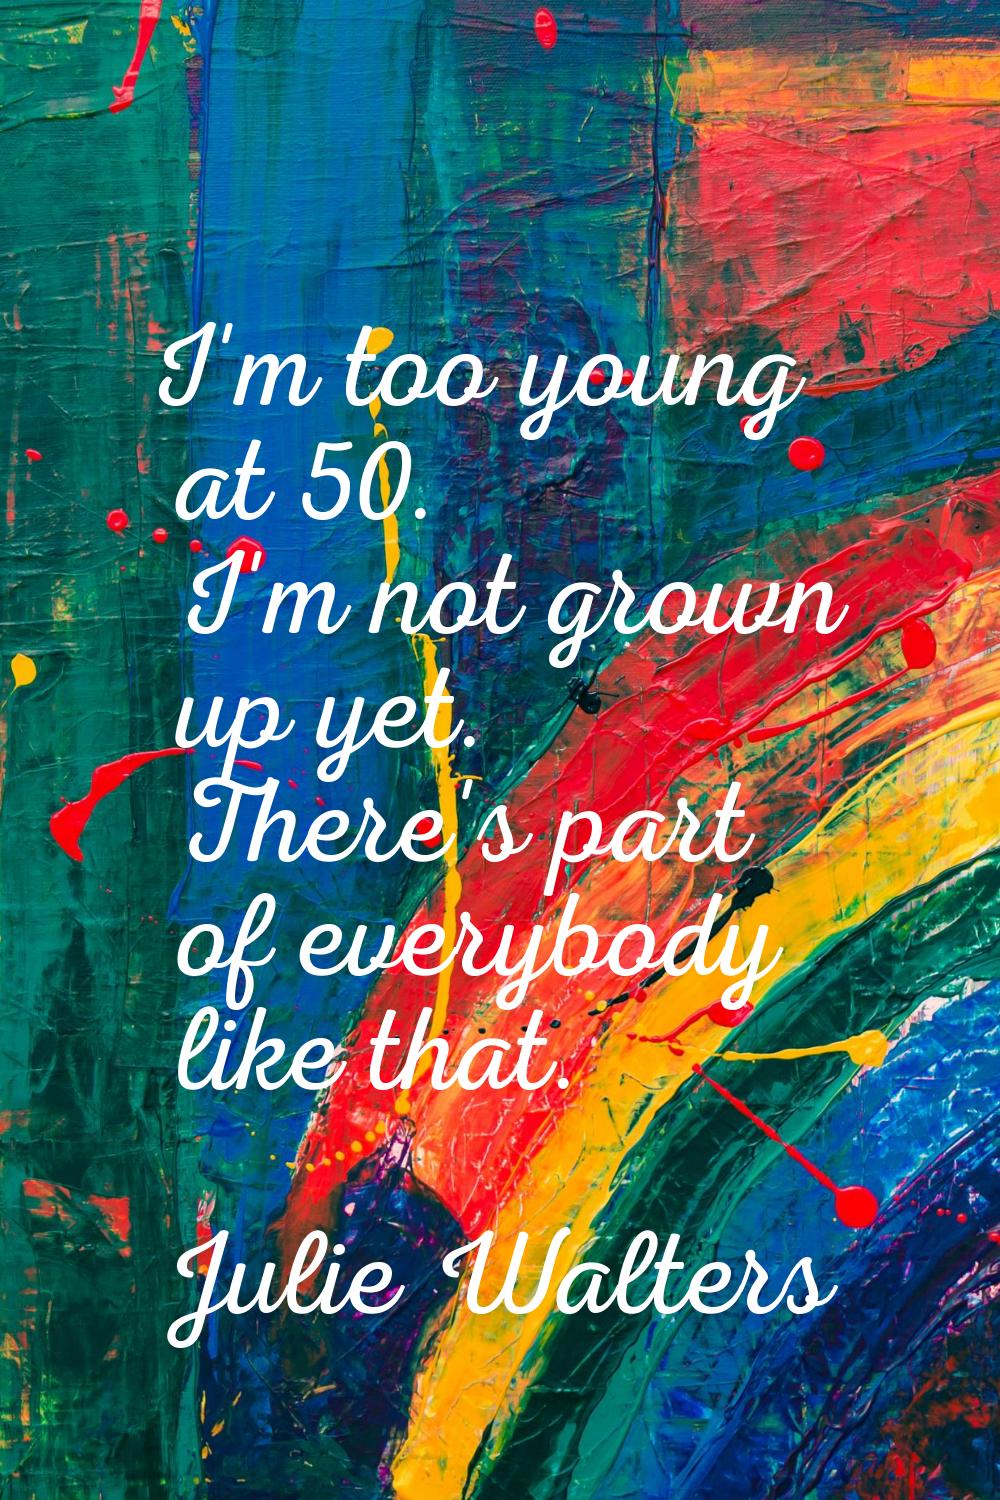 I'm too young at 50. I'm not grown up yet. There's part of everybody like that.